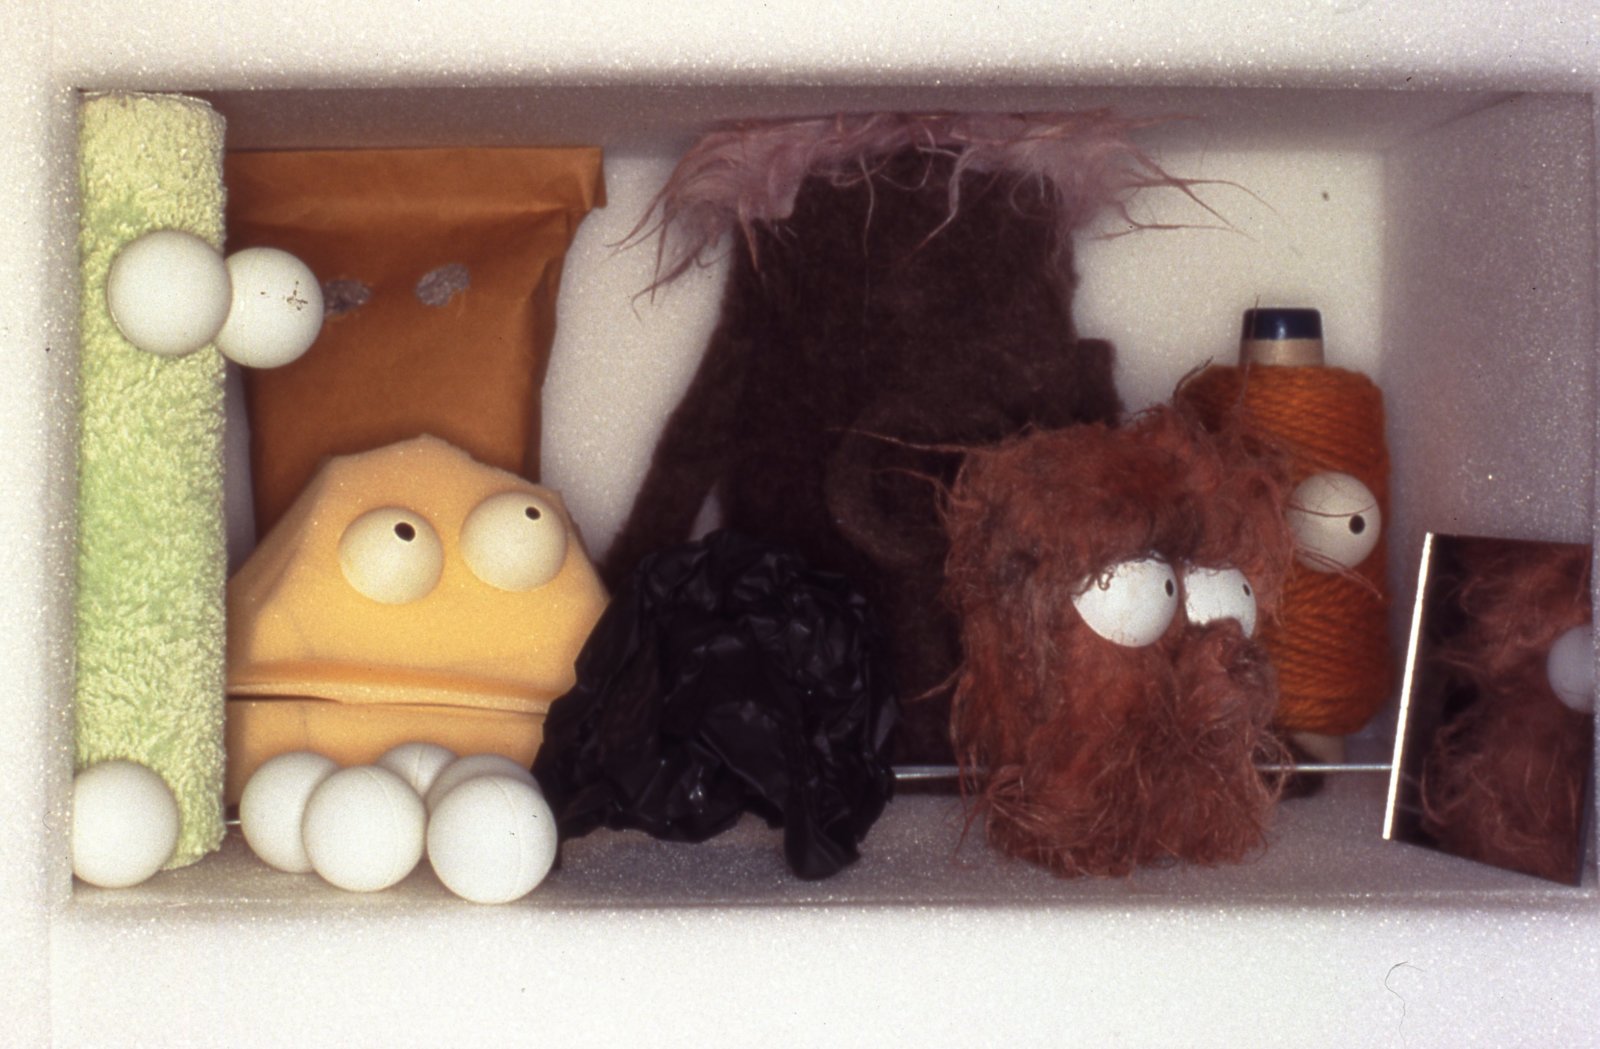 Geoffrey Farmer, Puppet Kit (Personality Workshop) (detail), 2001, crate, various media and video, dimensions variable